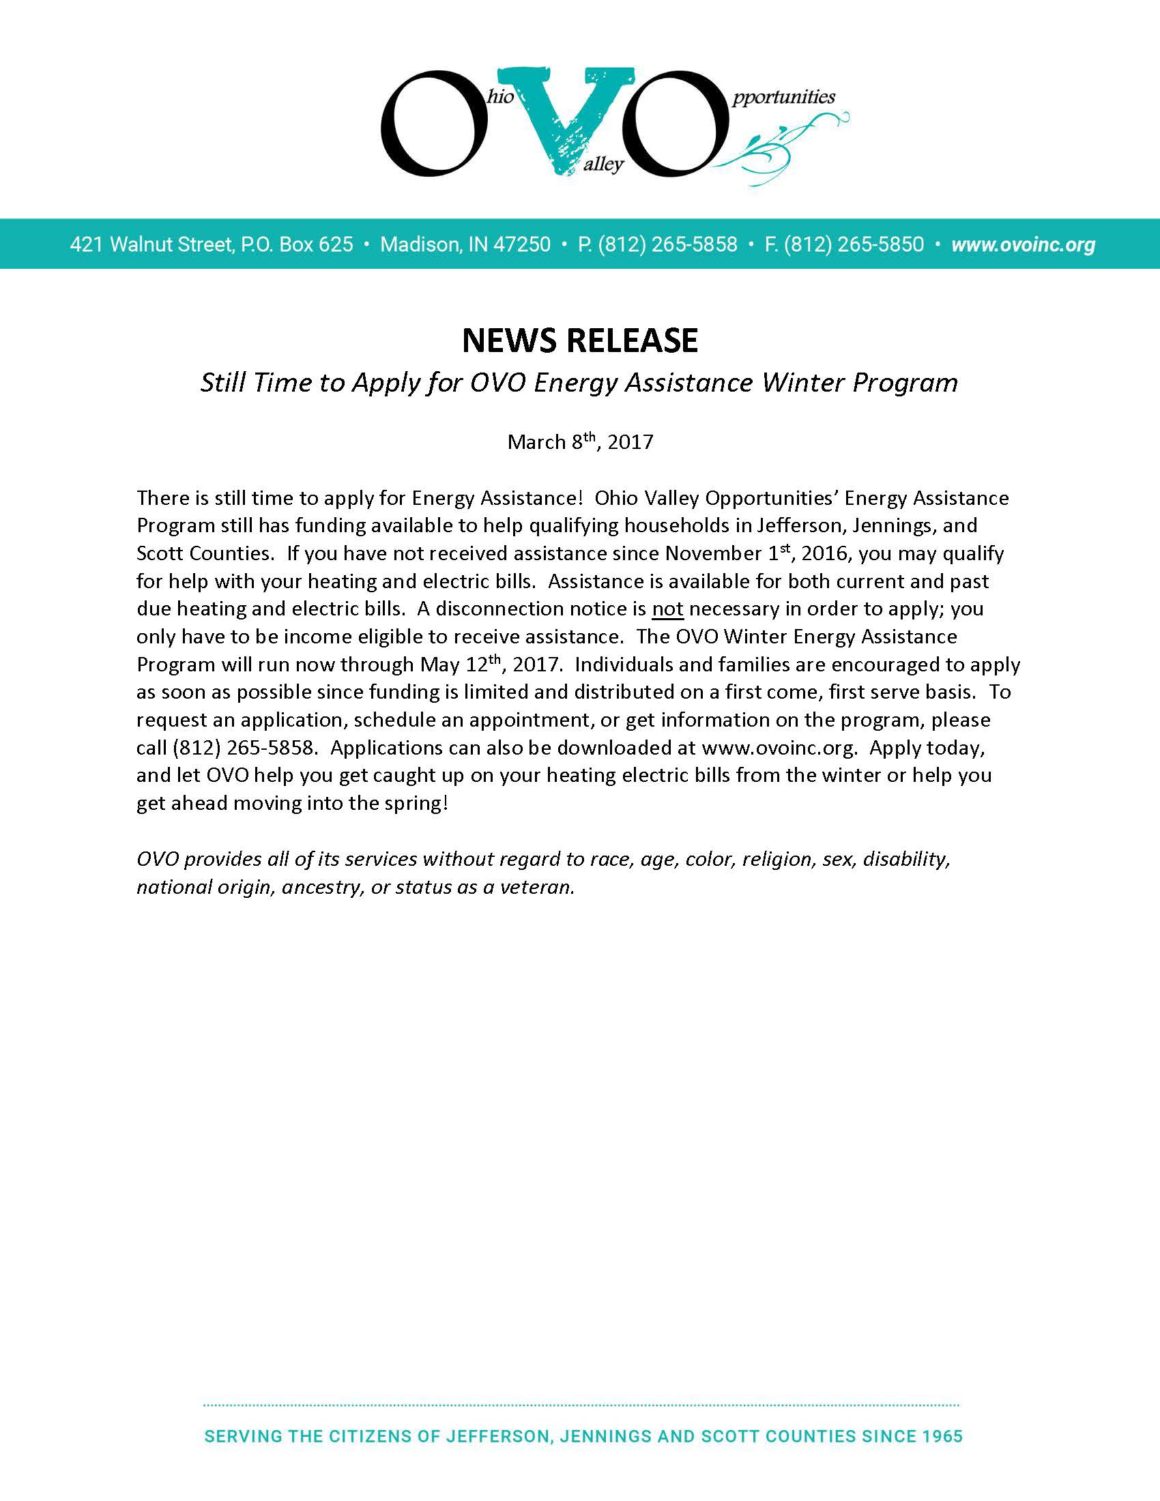 Still Time to Apply for OVO Energy Assistance Winter Program